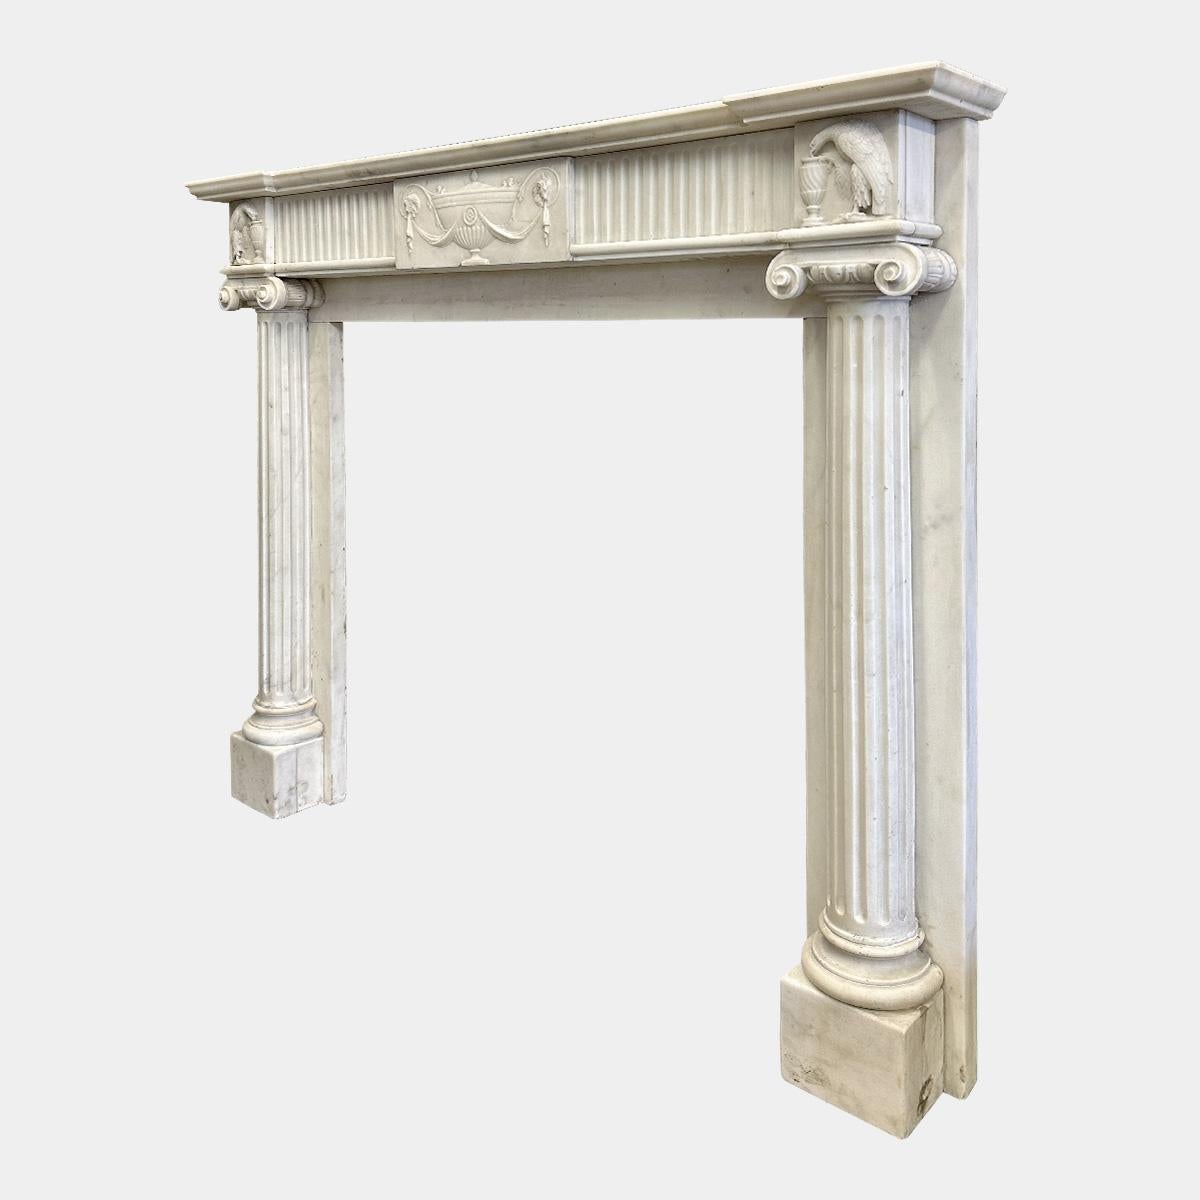 Hand-Carved An English Regency Statuary White Marble Columned Fireplace mantel  For Sale